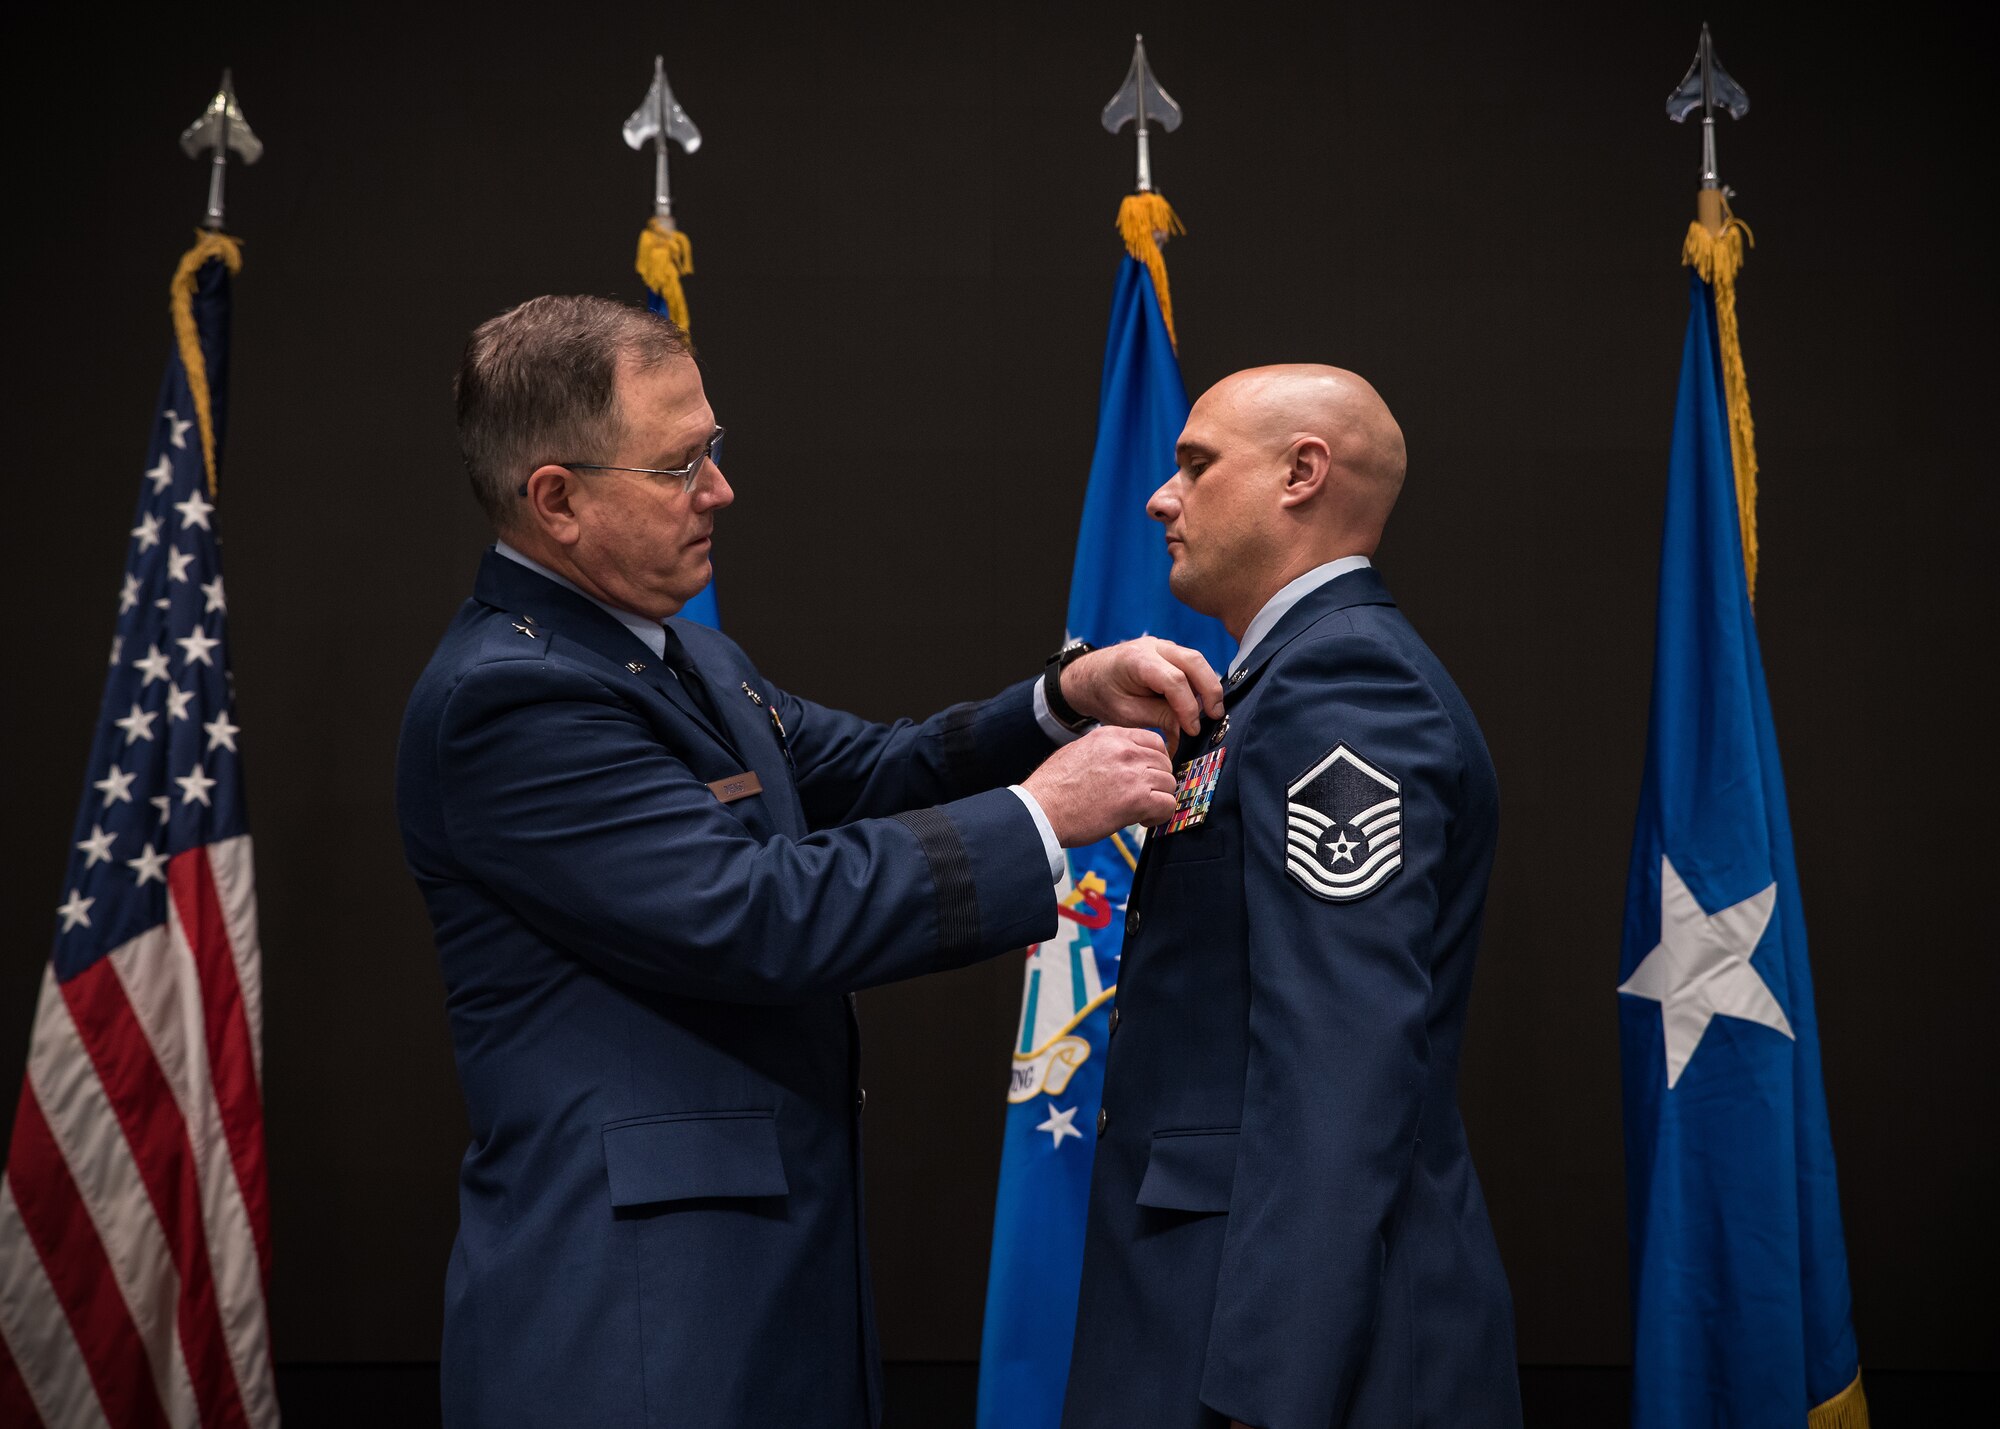 The Bronze Star was presented to Master Sgt. Timothy L. Heggedahl, an intelligence analyst, by Brig. Gen. James Dienst, commander of the Air Force Research Laboratory’s 711th Human Performance Wing, during a ceremony at the Air Force Institute of Technology, Wright-Patterson Air Force Base, on Feb. 26, 2020. Heggedahl was awarded the Bronze Star Medal by Lt. Gen. Joseph Guastella, U.S. Air Forces Central Command. Heggedahl distinguished himself by meritorious achievement while engaged in military operations in Iraq from Nov. 18, 2018, to June 25, 2019. (U.S. Air Force photo/Richard Eldridge)